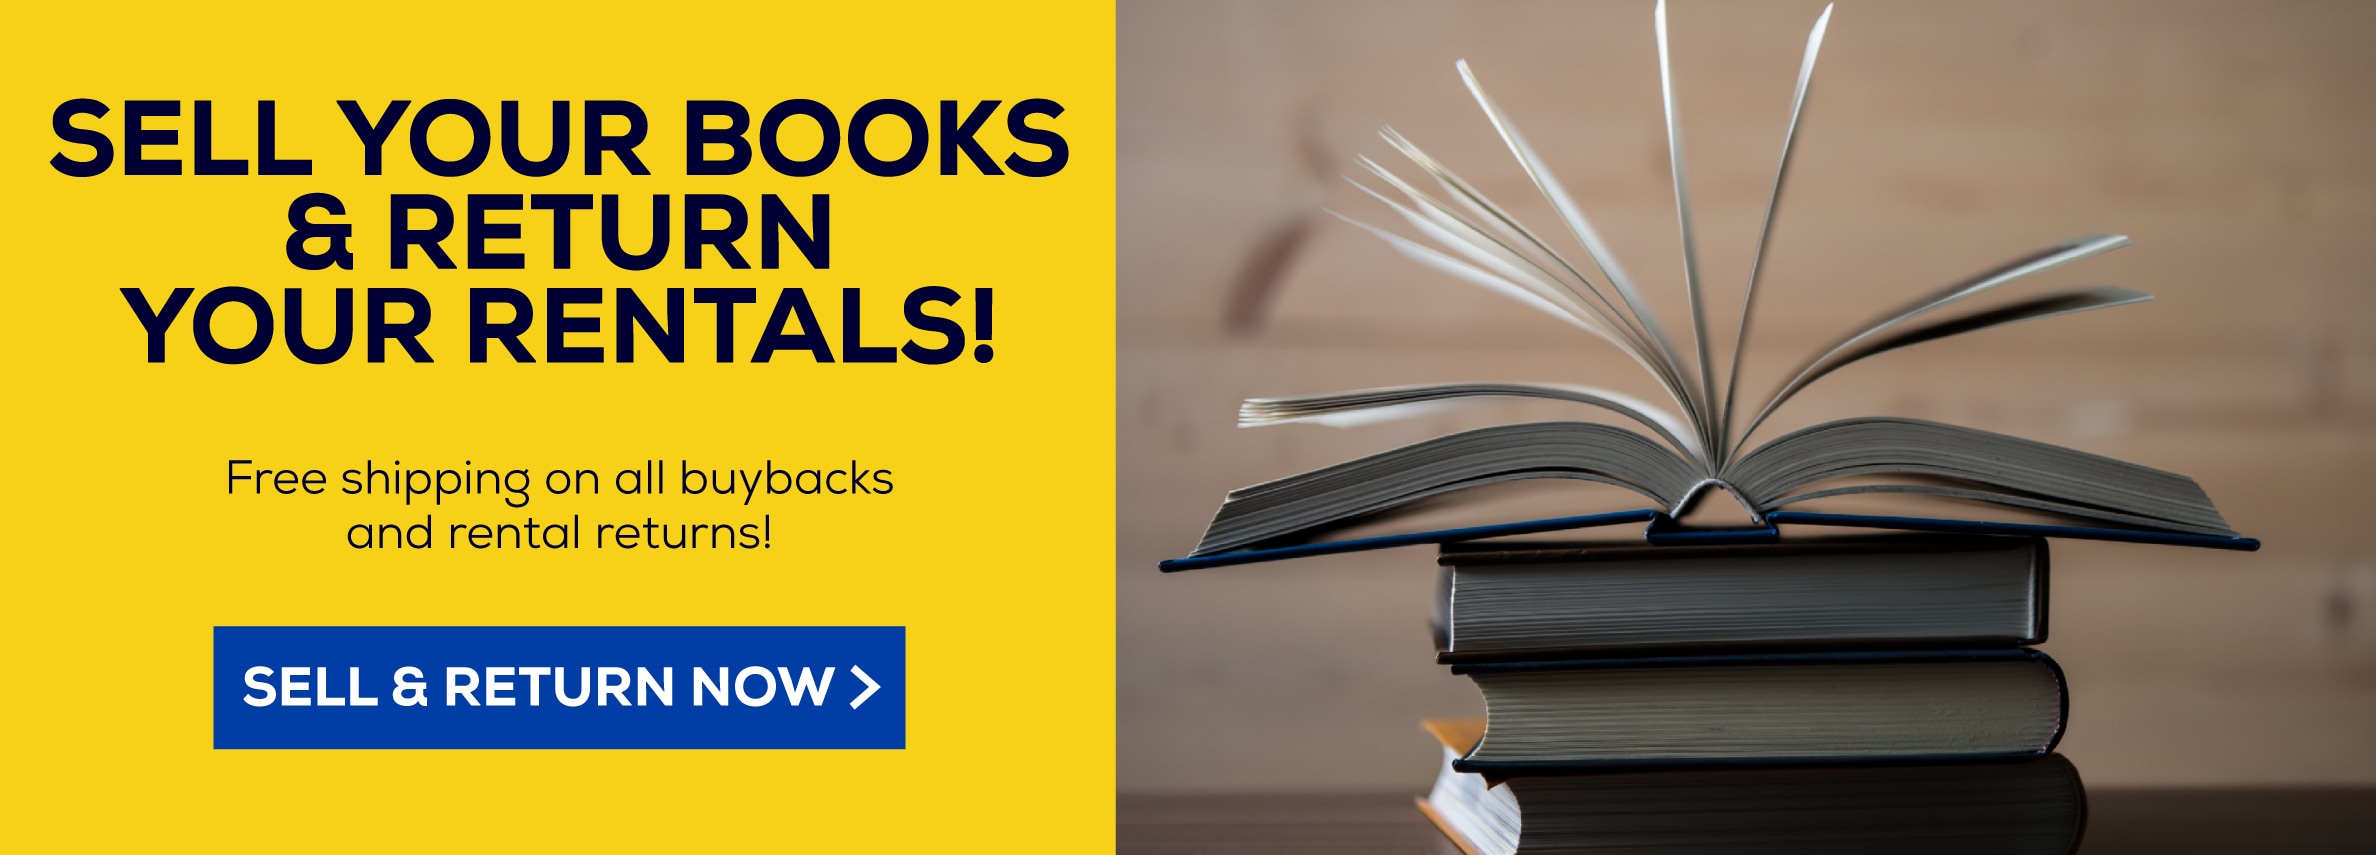 SELL YOUR BOOKS & RETURN YOUR RENTALS! Free shipping on all buybacks and rental returns! SELL & RETURN NOW >